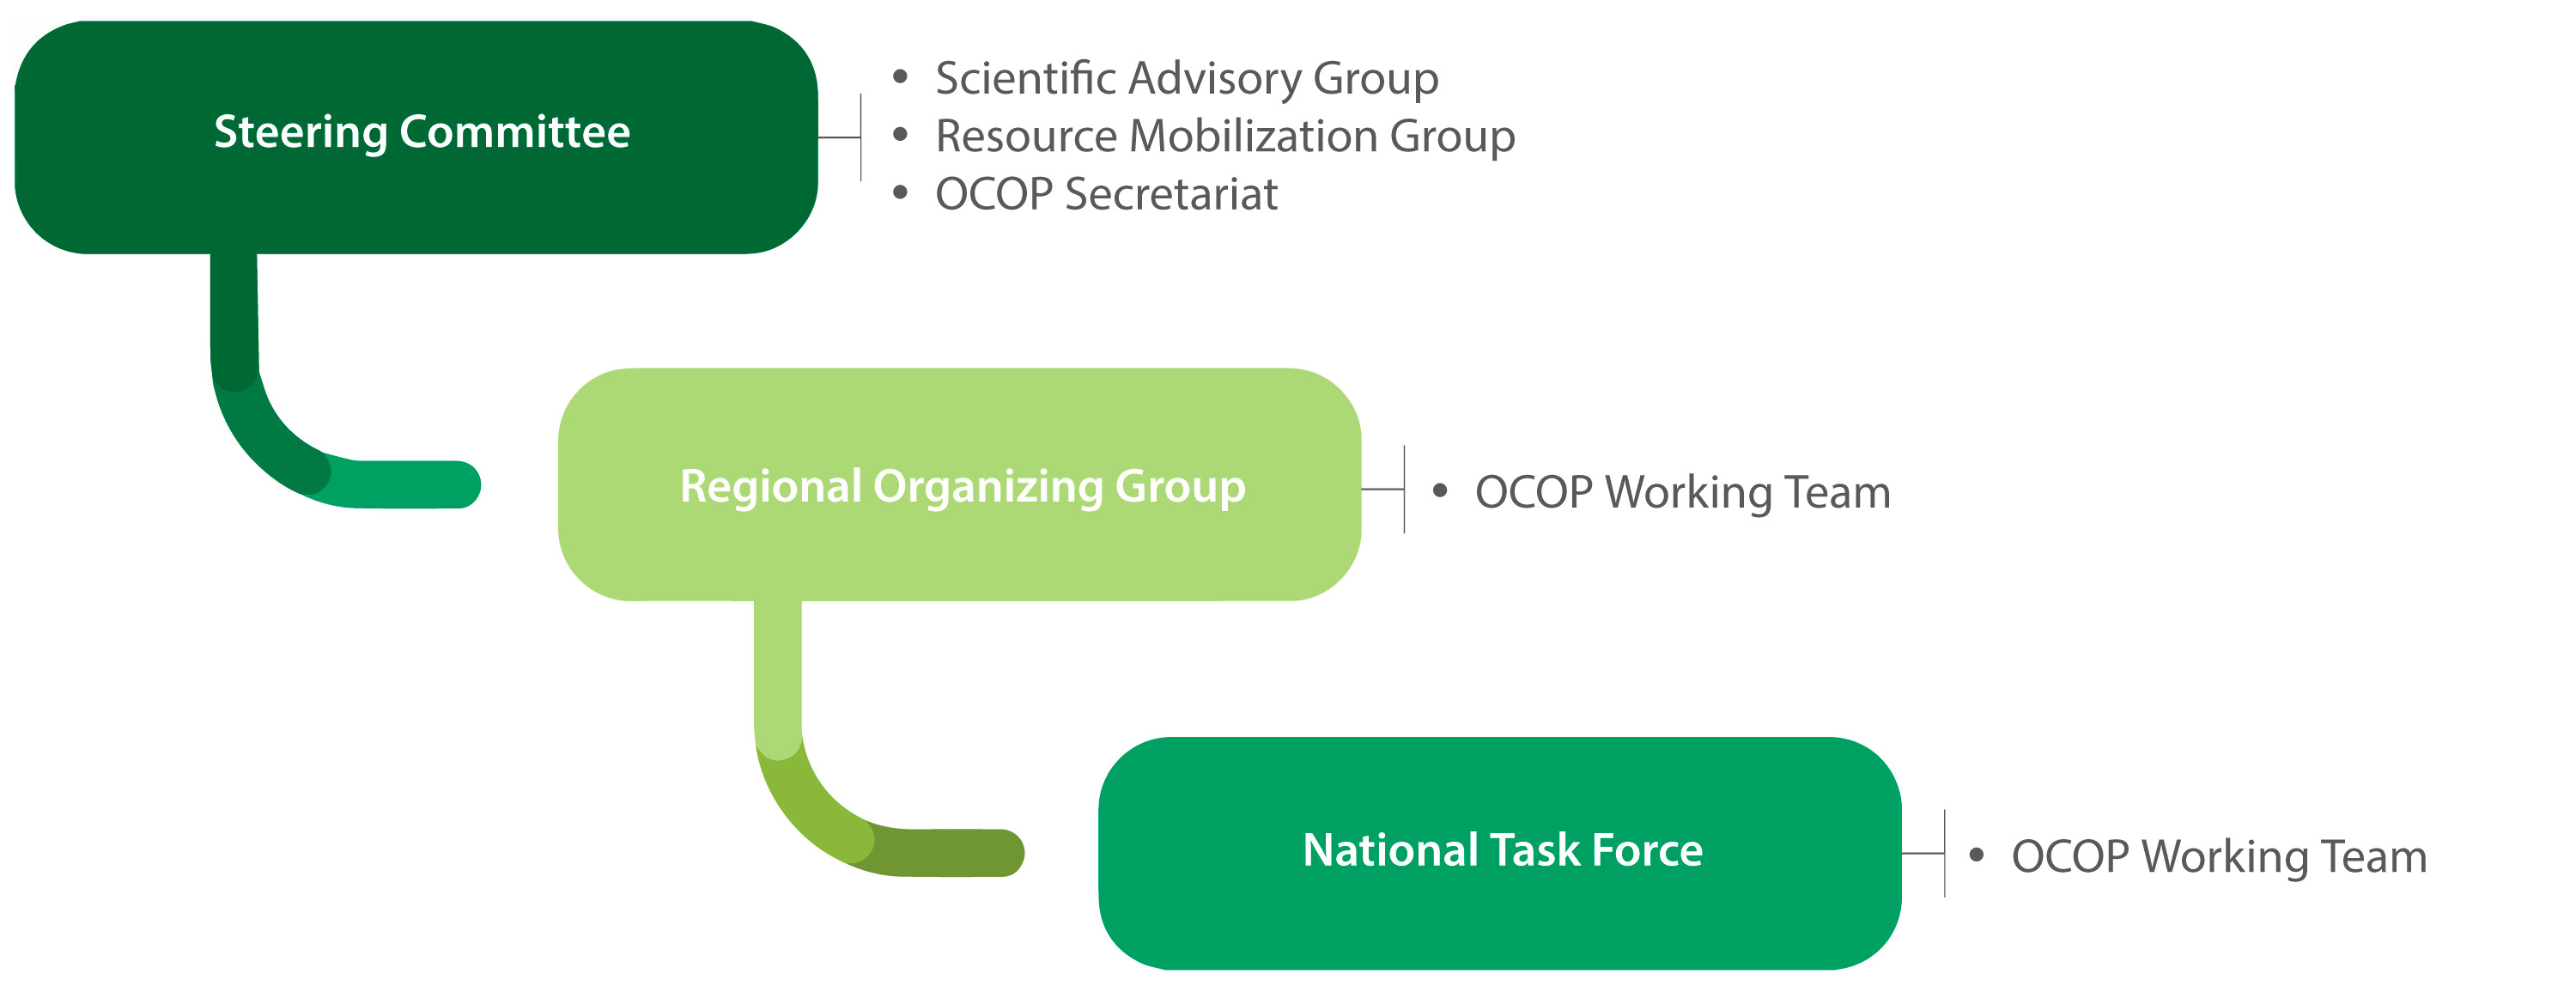 Coordination and implementation of the OCOP